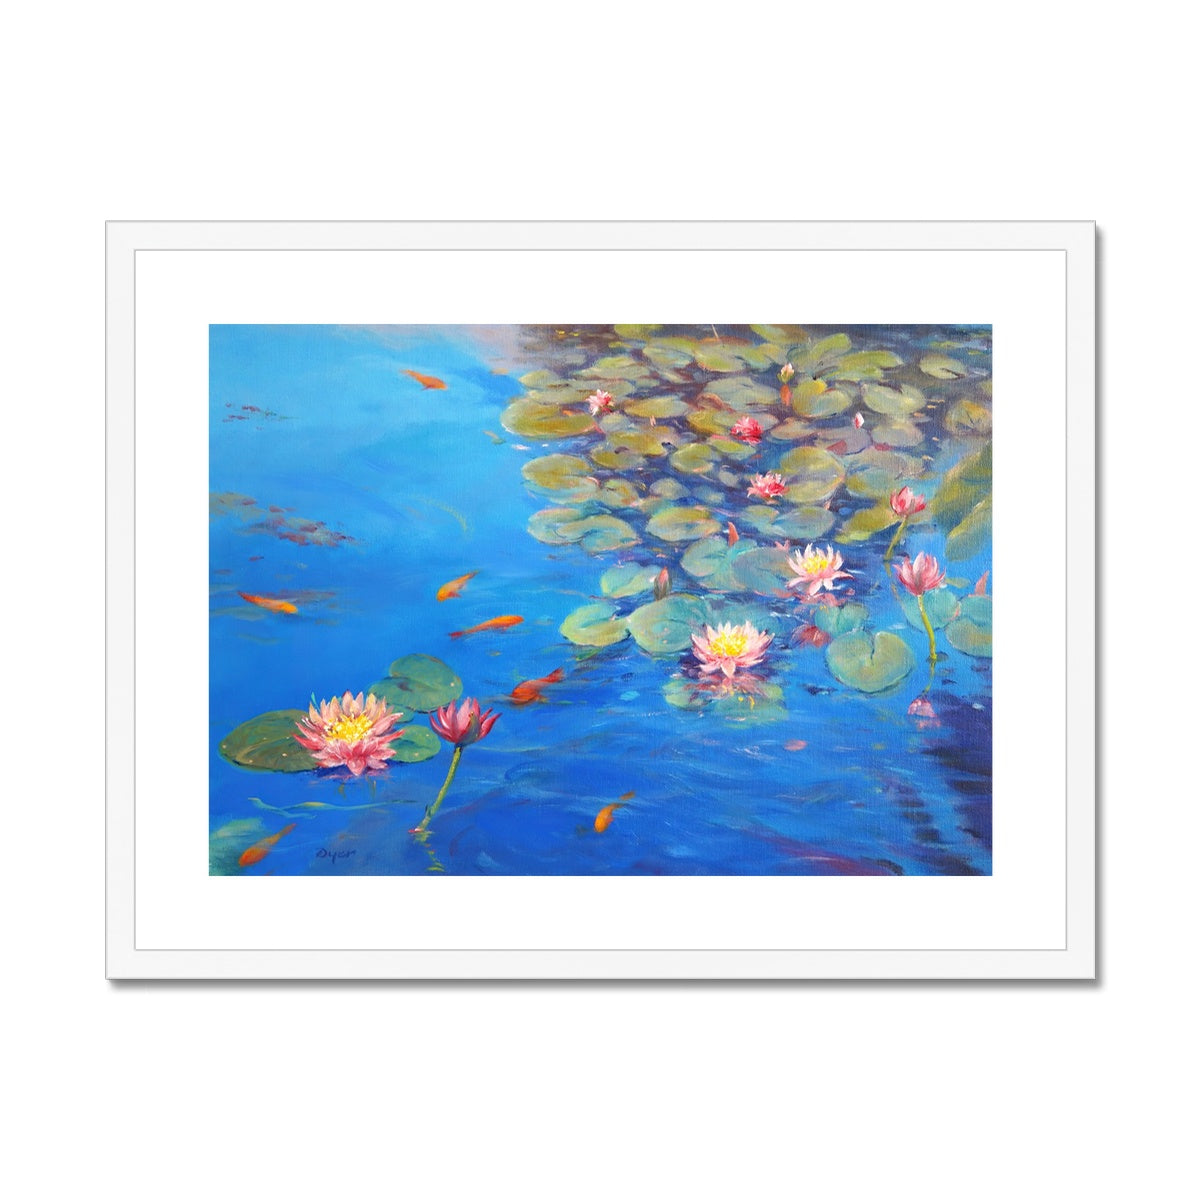 Ted Dyer Framed Open Edition Cornish Fine Art Print. &#39;Water lilies and Sky Reflections, Kimberley Park Pond Garden, Falmouth&#39;. Cornwall Art Gallery